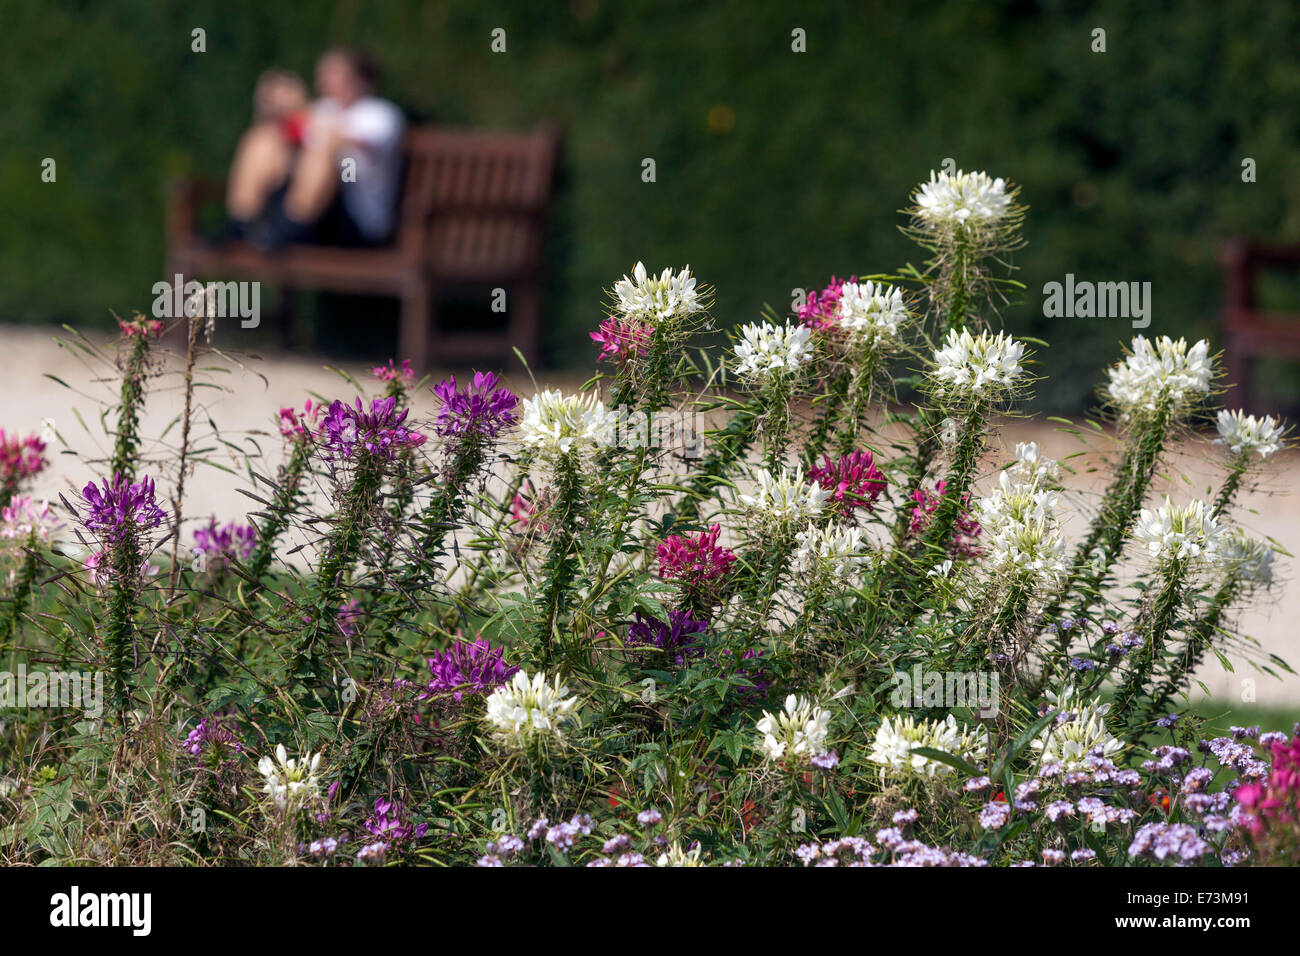 Cleome flowering in a colourful garden flower bed, garden path and bench bedding plant lining the pathway Stock Photo